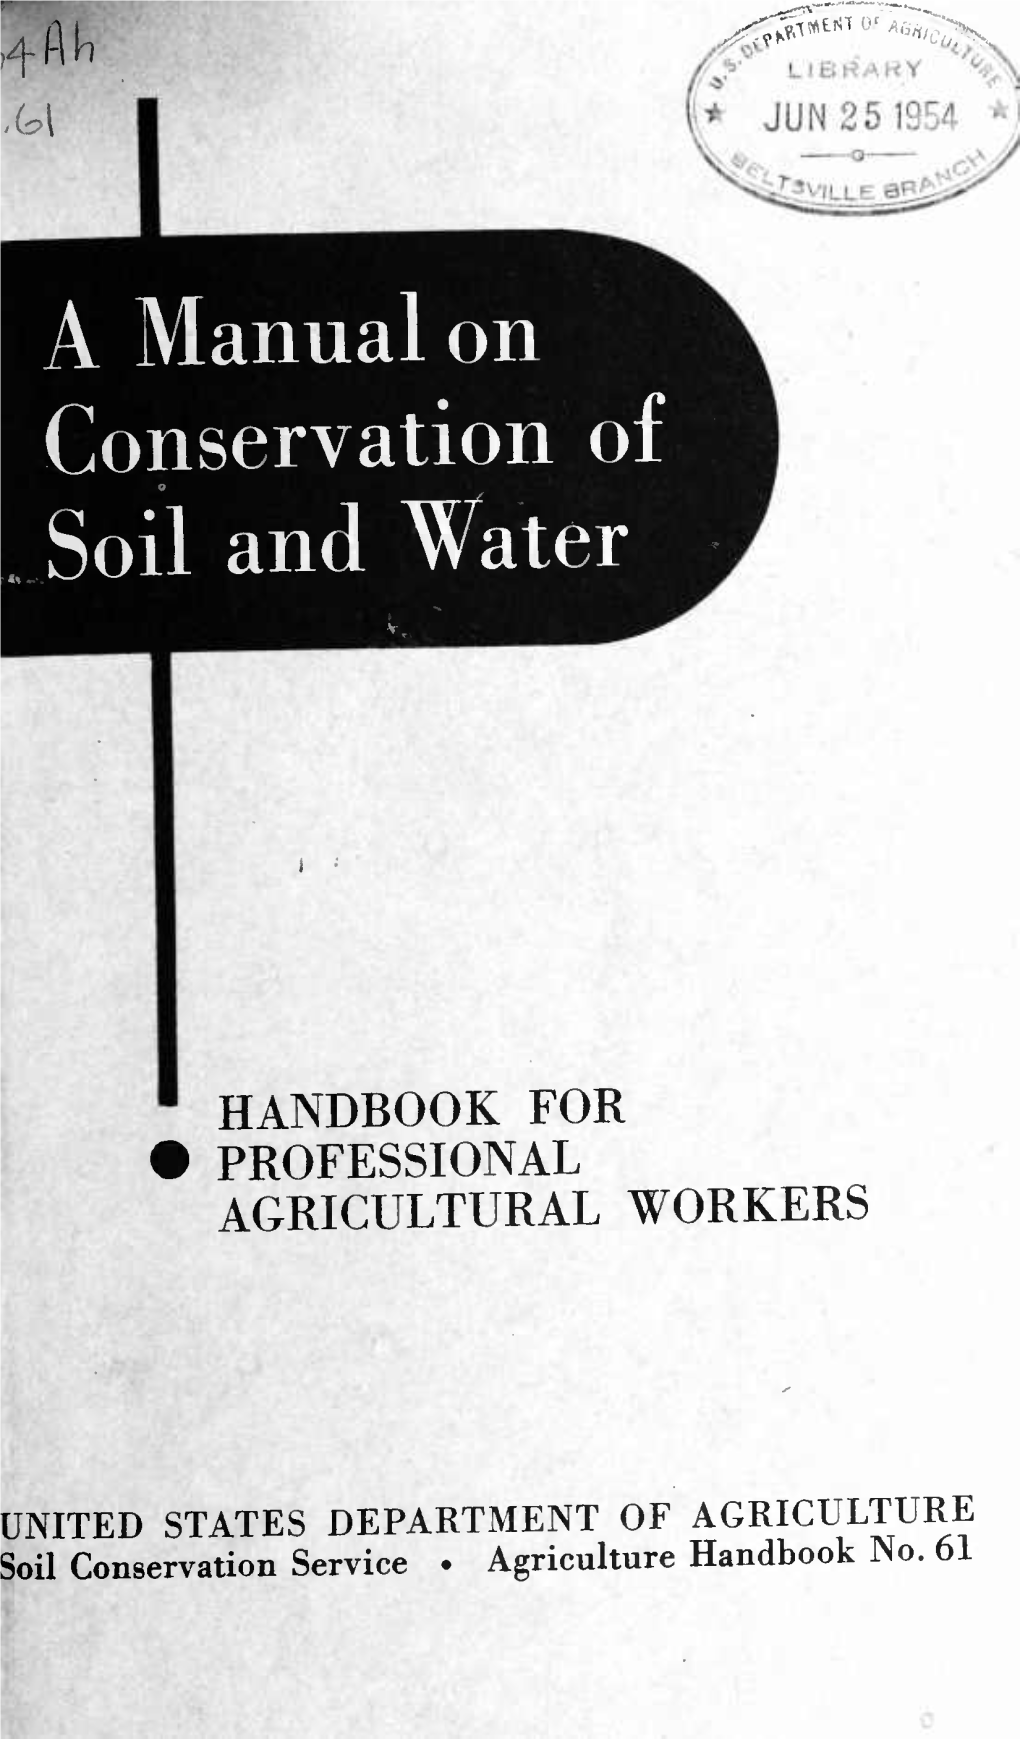 A Manual on Conservation of .Soil and Water